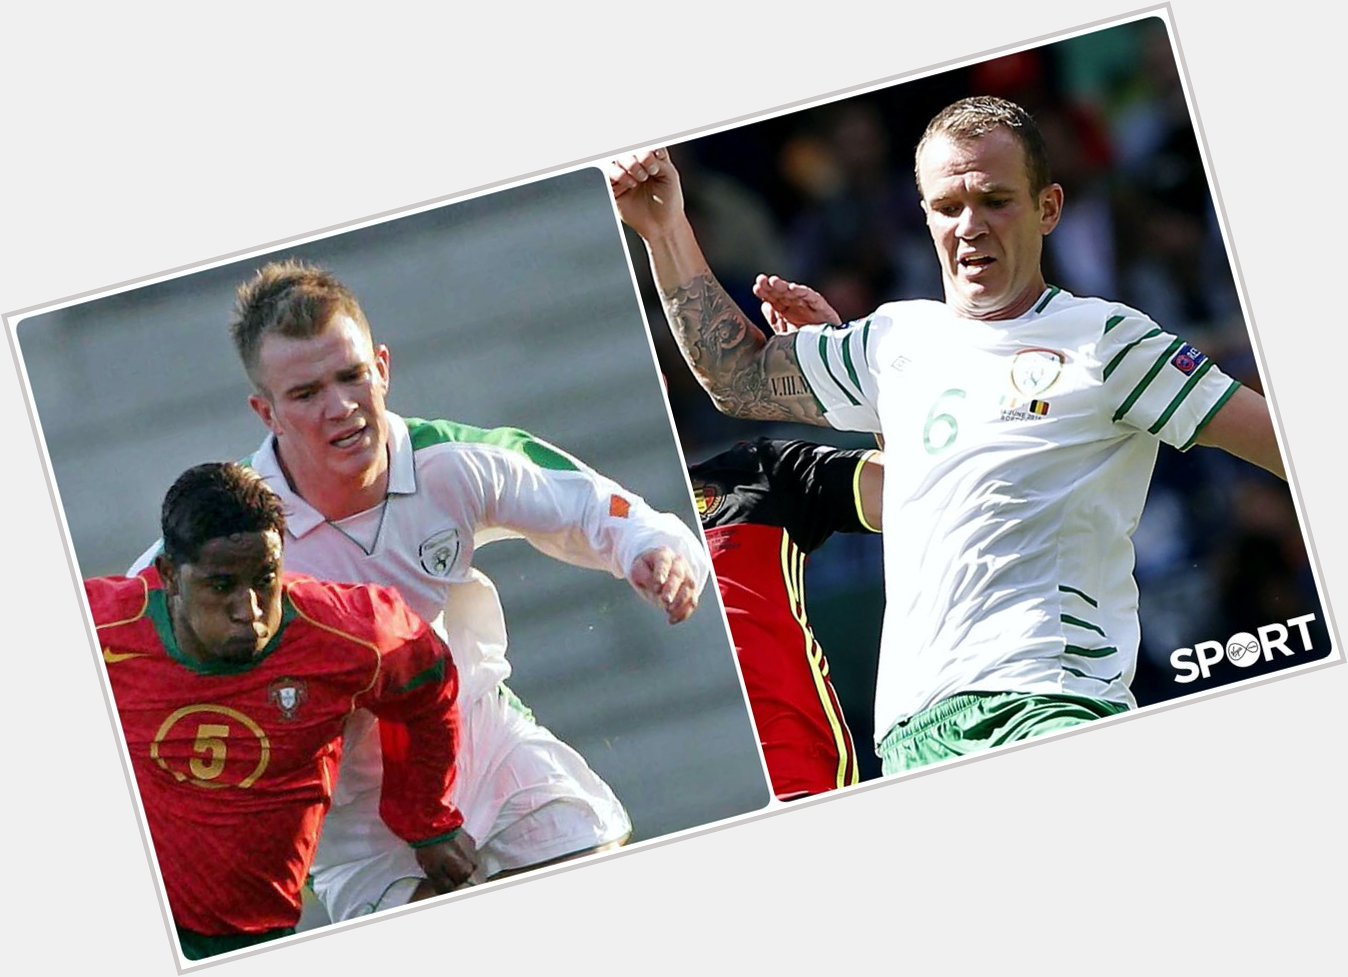 91 caps  37 years of age Happy birthday to Ireland\s (joint) 8th most capped footballer, Mr Glenn Whelan 